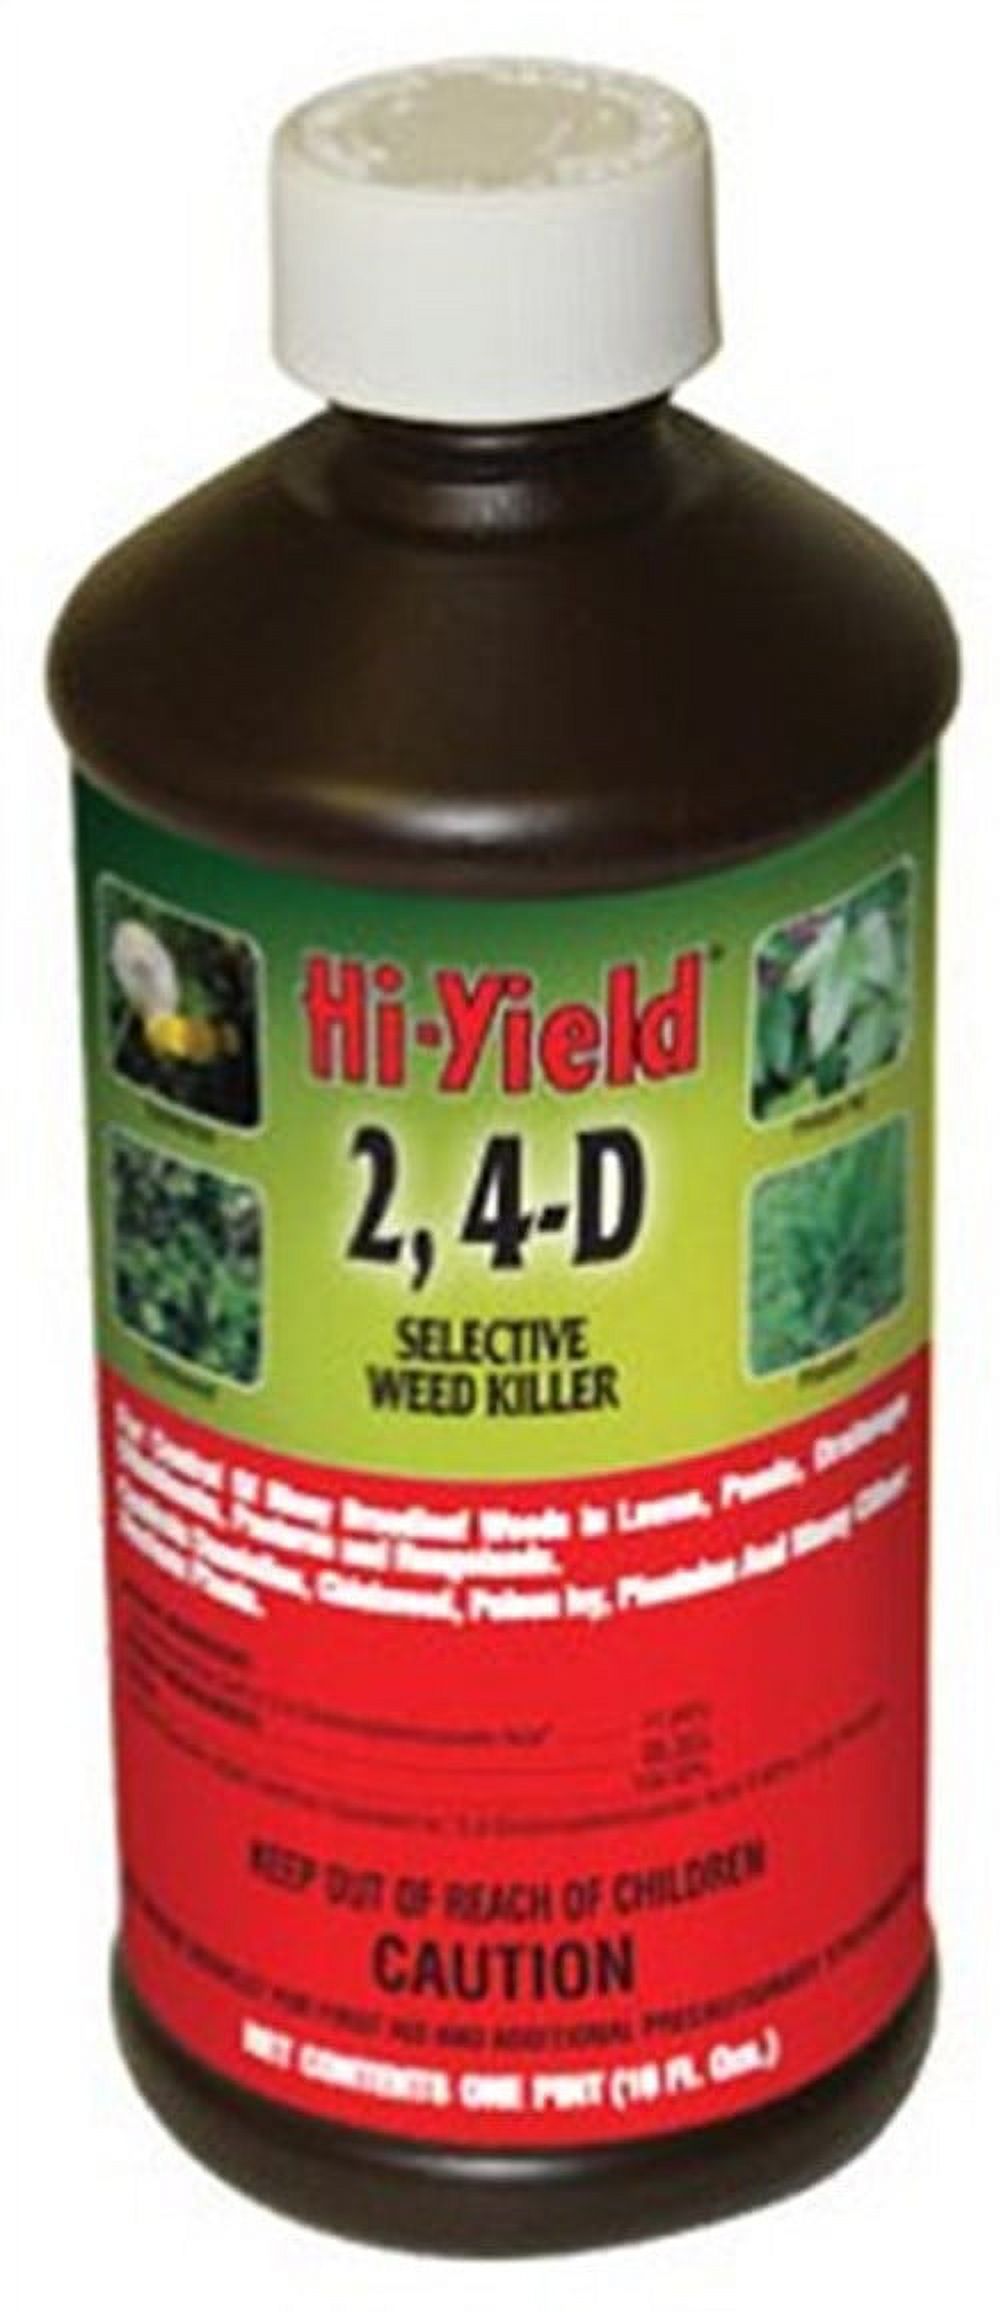 Voluntary Purchasing Group Hi-Yield 21414Selective Weed Killer, 16-Ounce - image 2 of 2